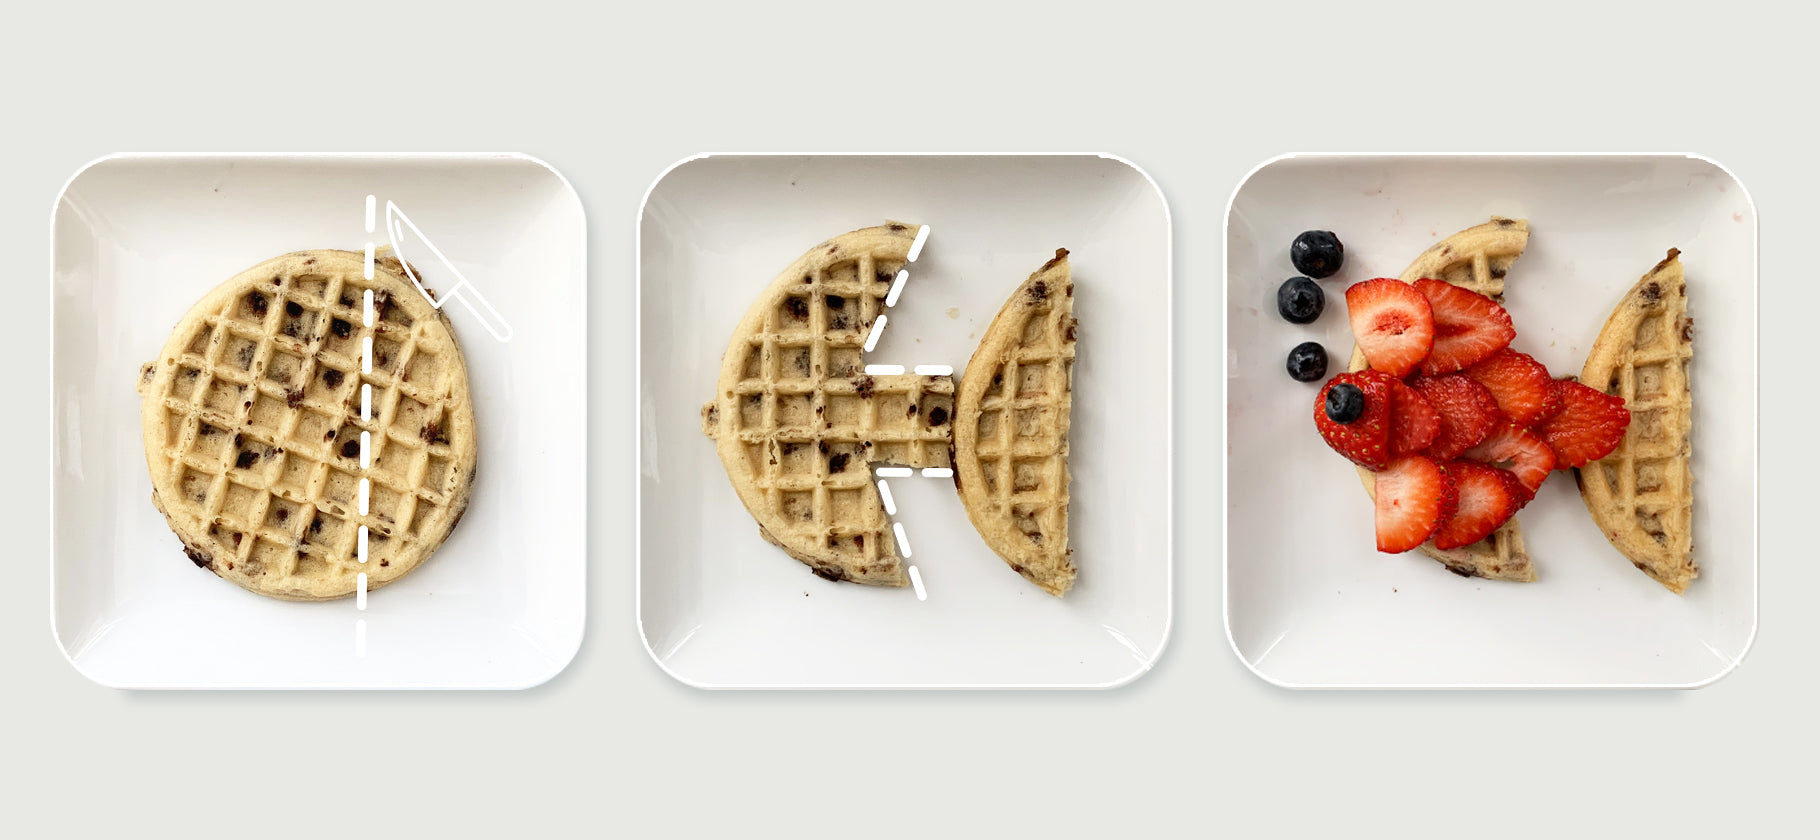 Positively Playful Plated Snacks for Kids